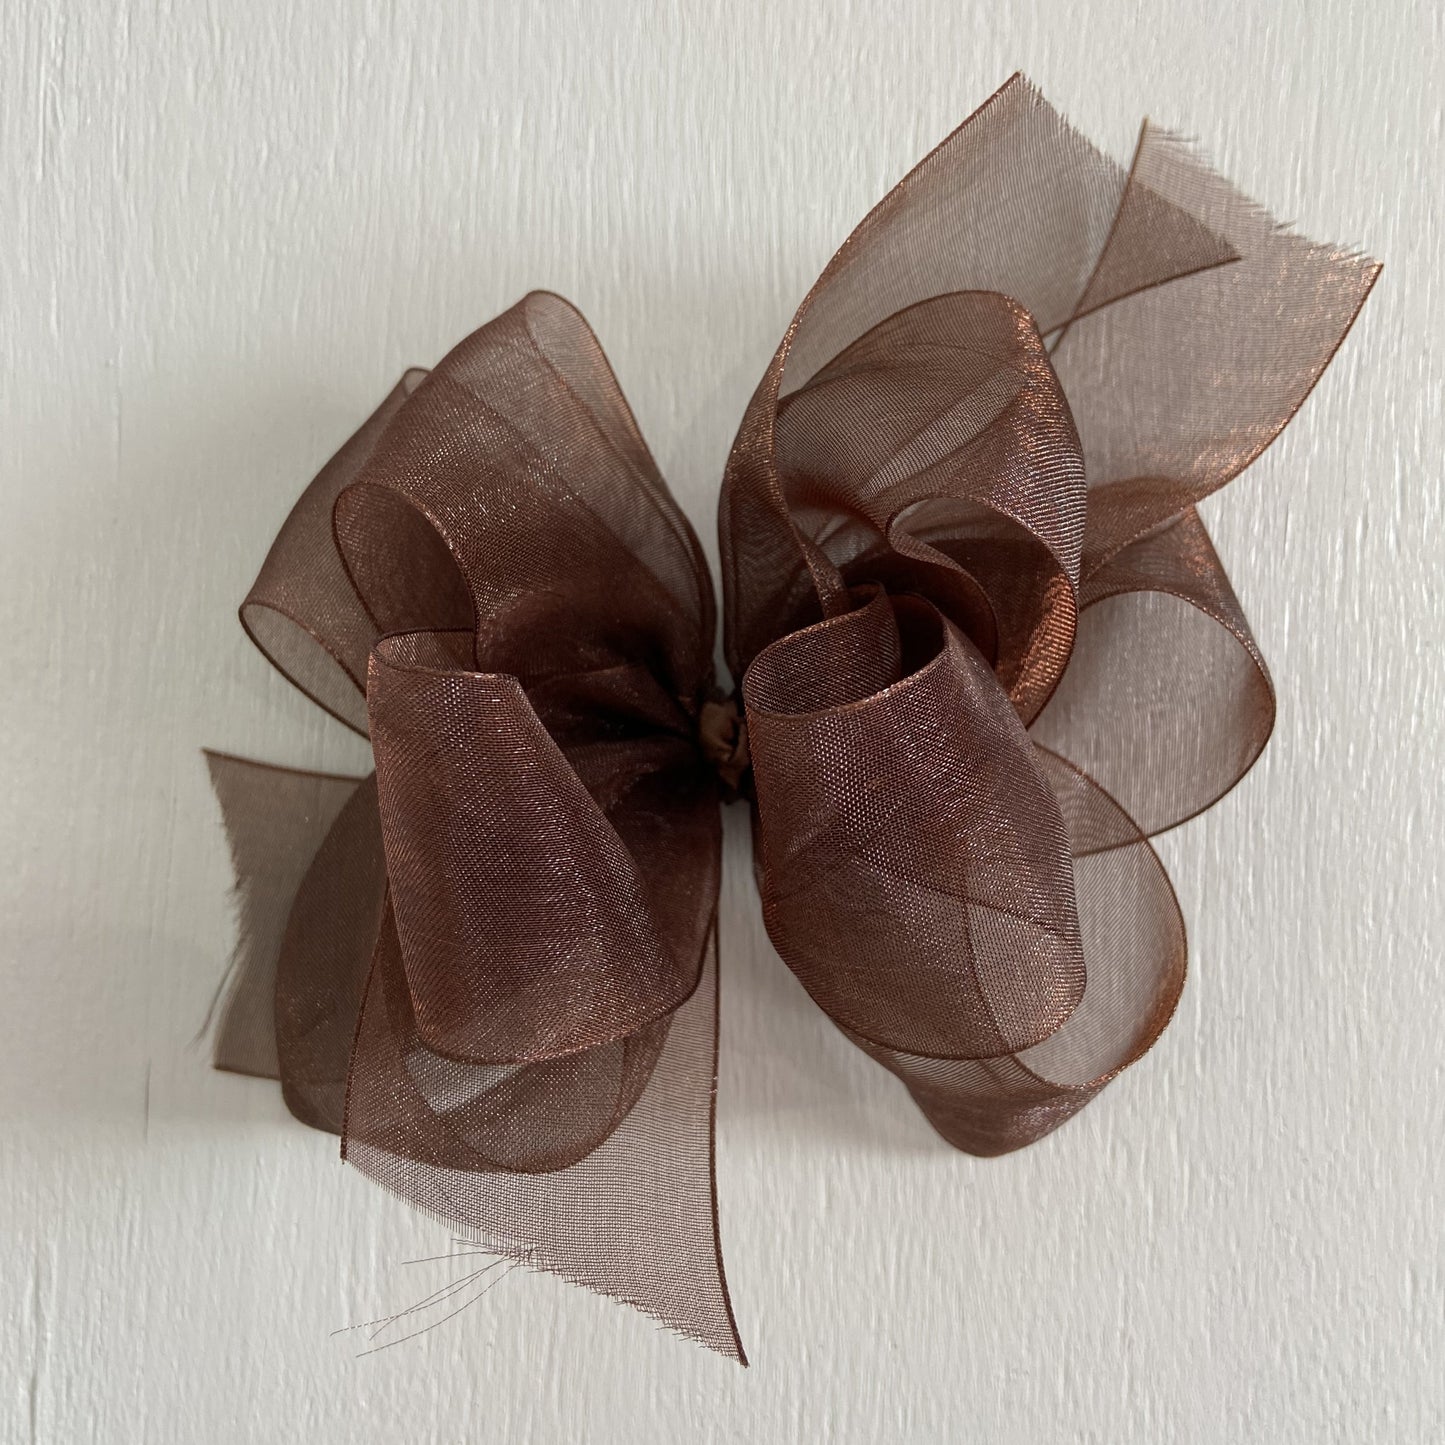 Sheer Bow, Large, Brown